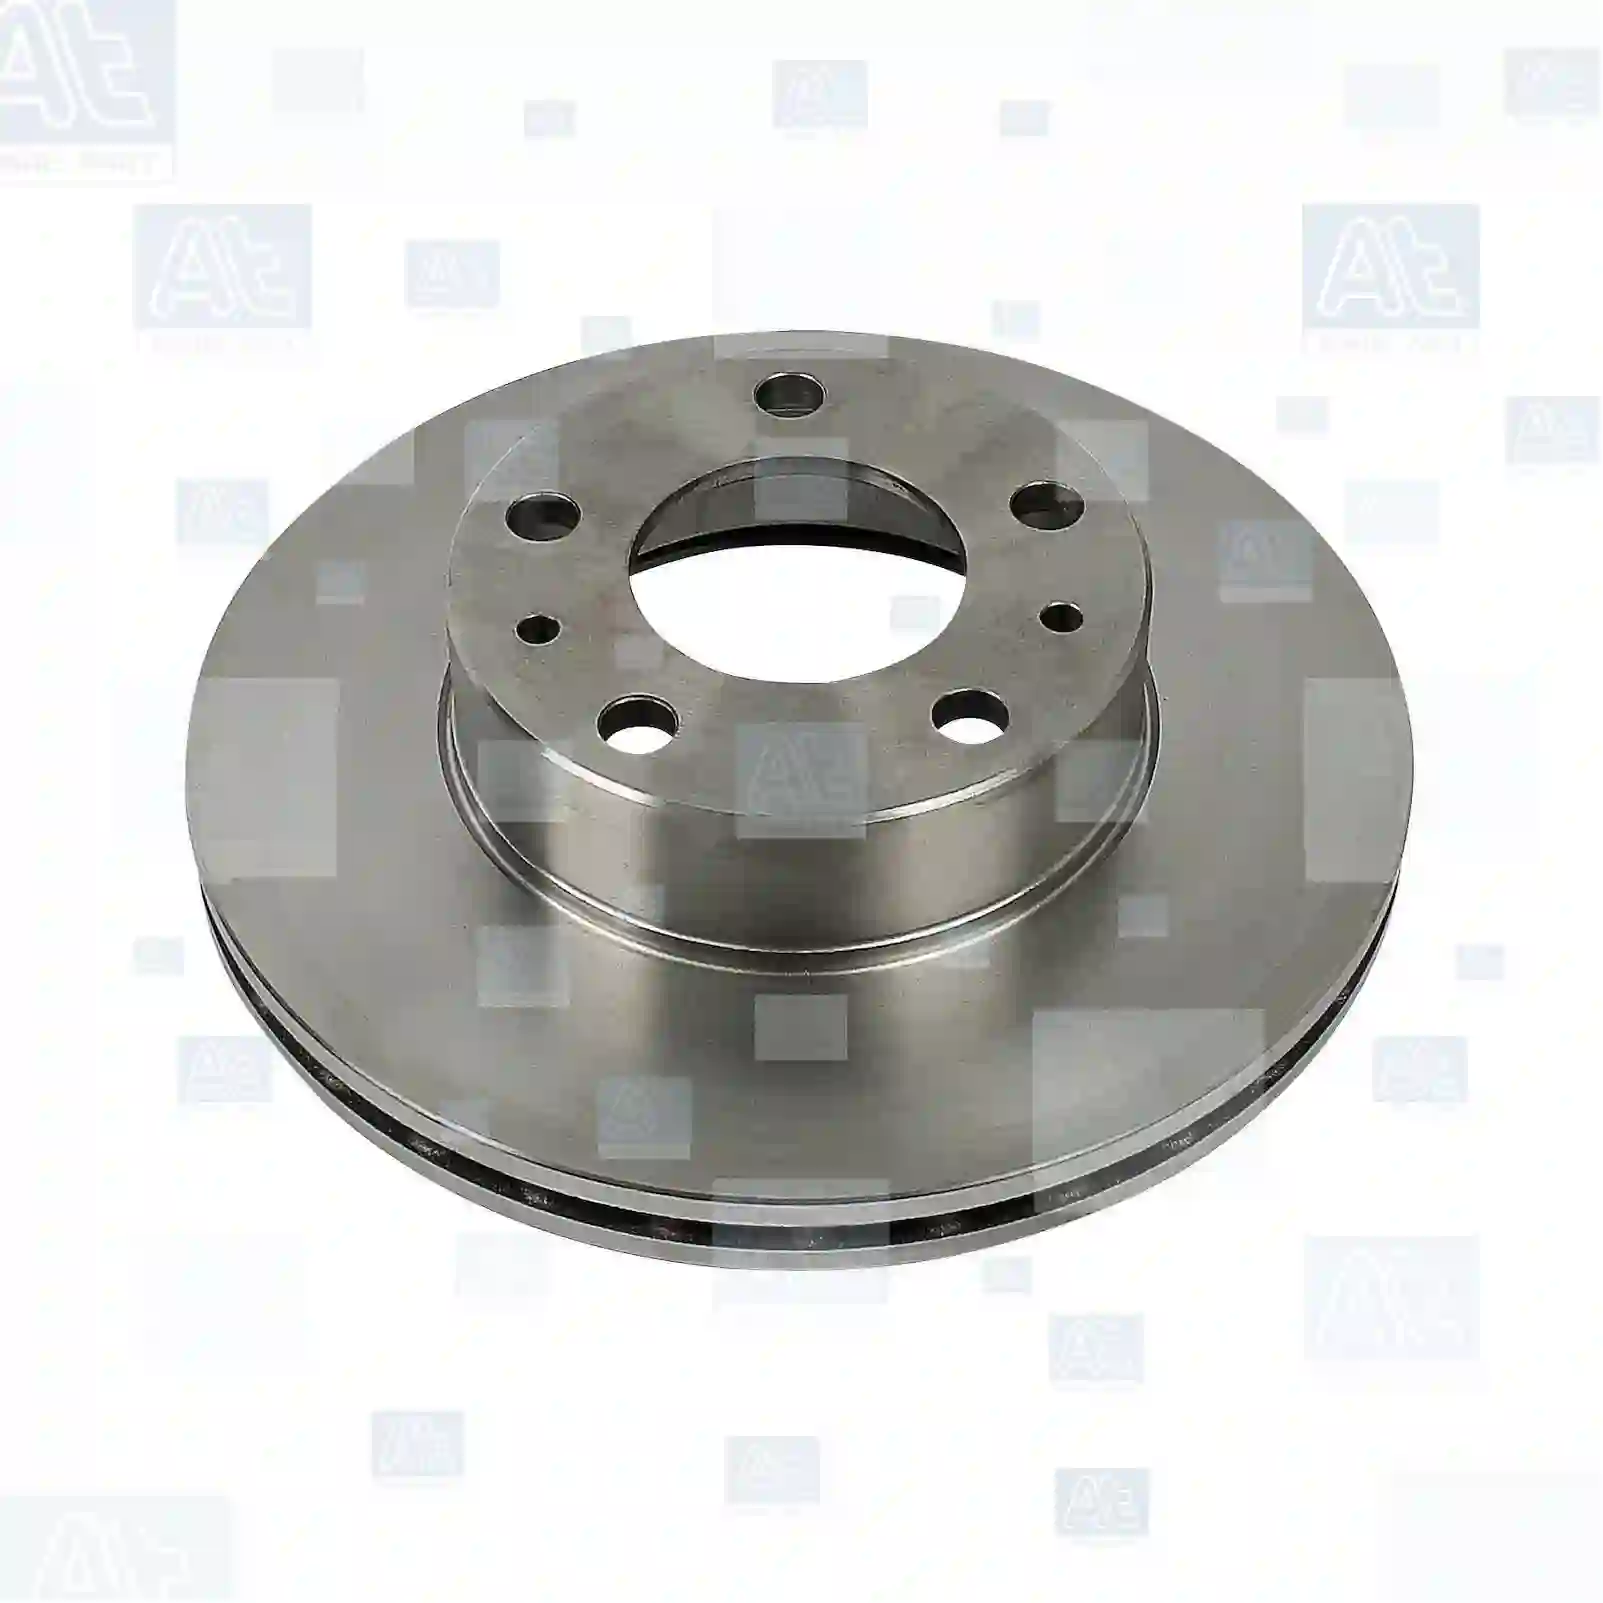 Brake disc, 77714734, 00004246Y1, 1606400980, 1607872080, 4246L2, 4246L3, 4246L4, 4246V4, 4246X9, 4246Y1, 424926, 424927, 424999, 4249E2, 4249G3, 4249H8, 4249K3, 1300501080, 46806233, 51728377, 51740244, 51848618, 51848619, 71738905, 71772595S, 00004246Y1, 1606400980, 1607872080, 4246L2, 4246L3, 4246L4, 4246V4, 4246X9, 4246Y1, 424926, 424927, 424999, 4249E2, 4249G3, 4249H8, 4249K3 ||  77714734 At Spare Part | Engine, Accelerator Pedal, Camshaft, Connecting Rod, Crankcase, Crankshaft, Cylinder Head, Engine Suspension Mountings, Exhaust Manifold, Exhaust Gas Recirculation, Filter Kits, Flywheel Housing, General Overhaul Kits, Engine, Intake Manifold, Oil Cleaner, Oil Cooler, Oil Filter, Oil Pump, Oil Sump, Piston & Liner, Sensor & Switch, Timing Case, Turbocharger, Cooling System, Belt Tensioner, Coolant Filter, Coolant Pipe, Corrosion Prevention Agent, Drive, Expansion Tank, Fan, Intercooler, Monitors & Gauges, Radiator, Thermostat, V-Belt / Timing belt, Water Pump, Fuel System, Electronical Injector Unit, Feed Pump, Fuel Filter, cpl., Fuel Gauge Sender,  Fuel Line, Fuel Pump, Fuel Tank, Injection Line Kit, Injection Pump, Exhaust System, Clutch & Pedal, Gearbox, Propeller Shaft, Axles, Brake System, Hubs & Wheels, Suspension, Leaf Spring, Universal Parts / Accessories, Steering, Electrical System, Cabin Brake disc, 77714734, 00004246Y1, 1606400980, 1607872080, 4246L2, 4246L3, 4246L4, 4246V4, 4246X9, 4246Y1, 424926, 424927, 424999, 4249E2, 4249G3, 4249H8, 4249K3, 1300501080, 46806233, 51728377, 51740244, 51848618, 51848619, 71738905, 71772595S, 00004246Y1, 1606400980, 1607872080, 4246L2, 4246L3, 4246L4, 4246V4, 4246X9, 4246Y1, 424926, 424927, 424999, 4249E2, 4249G3, 4249H8, 4249K3 ||  77714734 At Spare Part | Engine, Accelerator Pedal, Camshaft, Connecting Rod, Crankcase, Crankshaft, Cylinder Head, Engine Suspension Mountings, Exhaust Manifold, Exhaust Gas Recirculation, Filter Kits, Flywheel Housing, General Overhaul Kits, Engine, Intake Manifold, Oil Cleaner, Oil Cooler, Oil Filter, Oil Pump, Oil Sump, Piston & Liner, Sensor & Switch, Timing Case, Turbocharger, Cooling System, Belt Tensioner, Coolant Filter, Coolant Pipe, Corrosion Prevention Agent, Drive, Expansion Tank, Fan, Intercooler, Monitors & Gauges, Radiator, Thermostat, V-Belt / Timing belt, Water Pump, Fuel System, Electronical Injector Unit, Feed Pump, Fuel Filter, cpl., Fuel Gauge Sender,  Fuel Line, Fuel Pump, Fuel Tank, Injection Line Kit, Injection Pump, Exhaust System, Clutch & Pedal, Gearbox, Propeller Shaft, Axles, Brake System, Hubs & Wheels, Suspension, Leaf Spring, Universal Parts / Accessories, Steering, Electrical System, Cabin